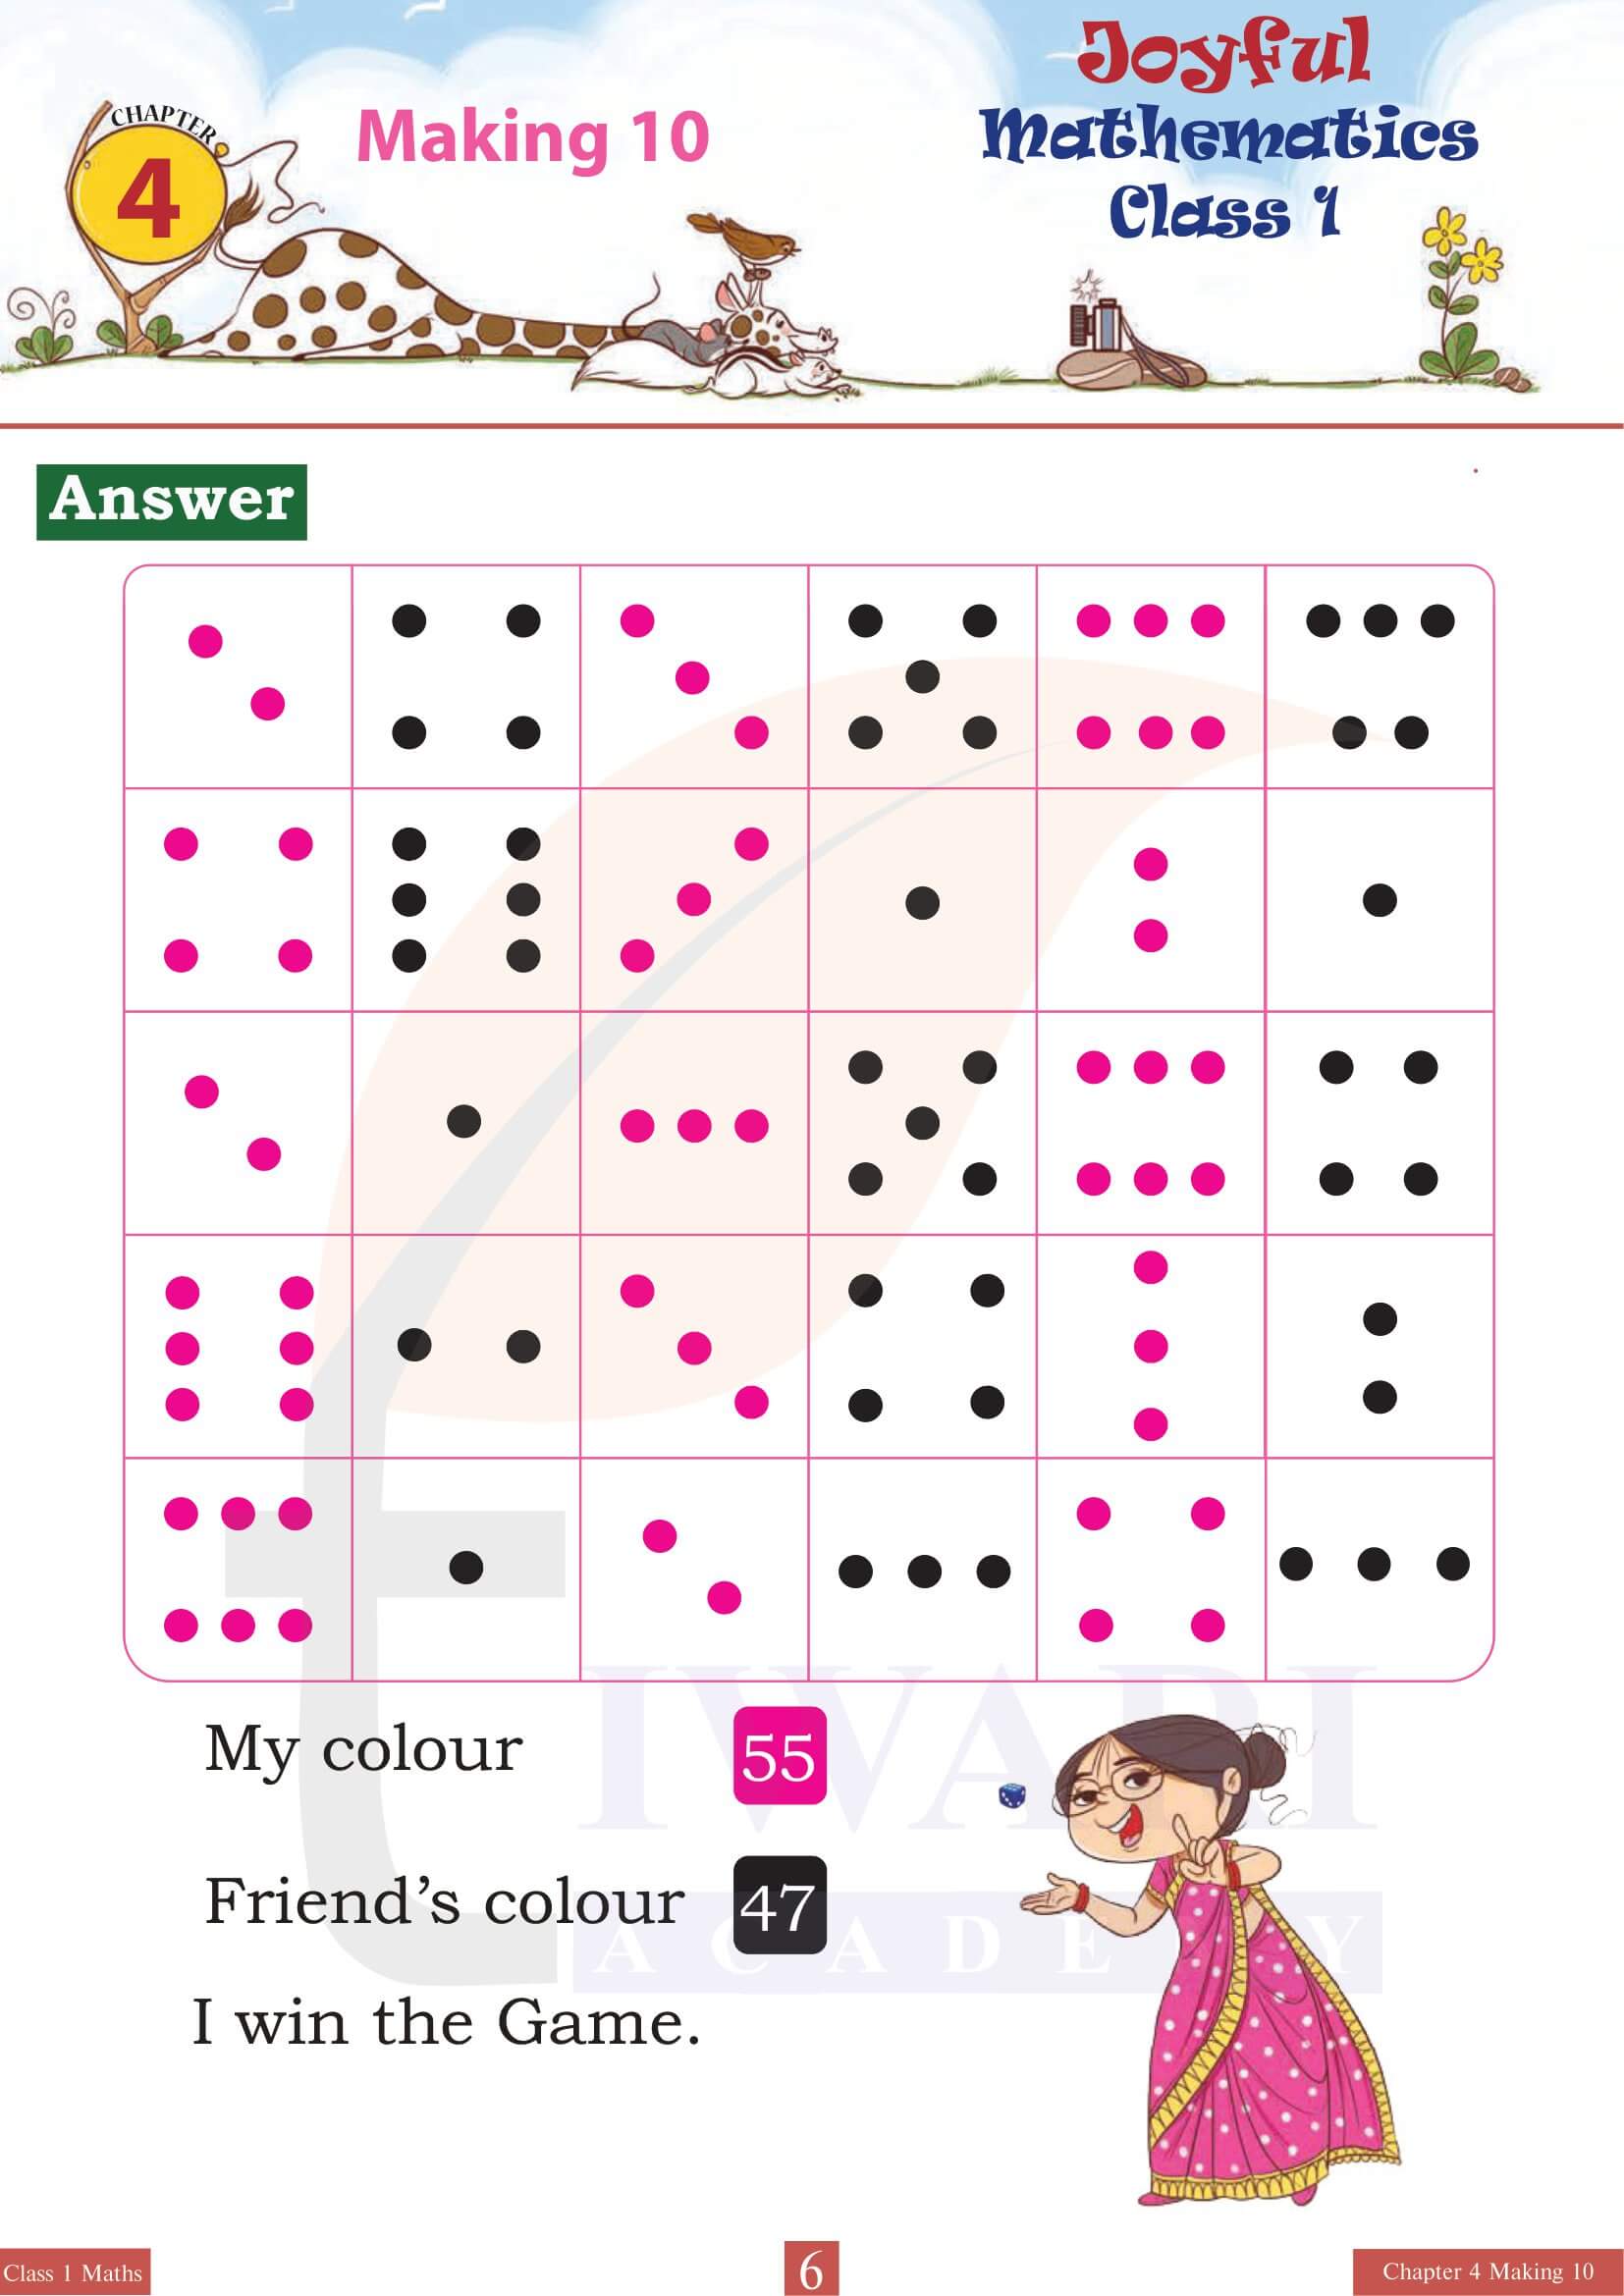 Class 1 Maths Joyful Chapter 4 updated for new session